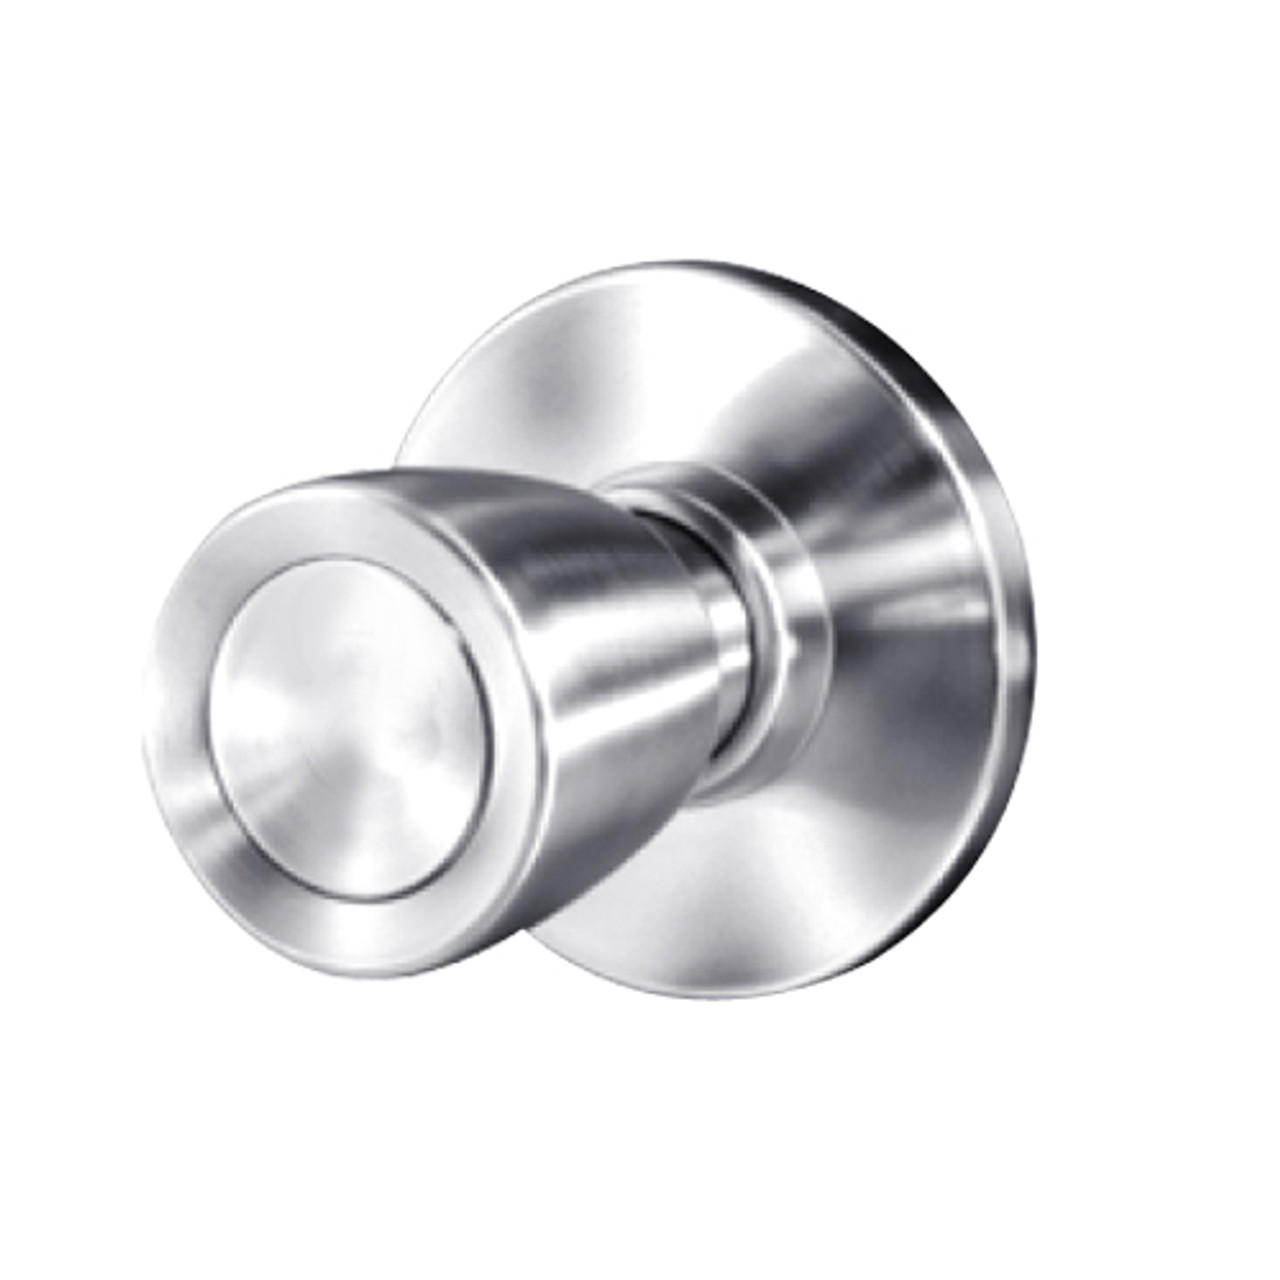 8K30Q6AS3625 Best 8K Series Exit Heavy Duty Cylindrical Knob Locks with Tulip Style in Bright Chrome